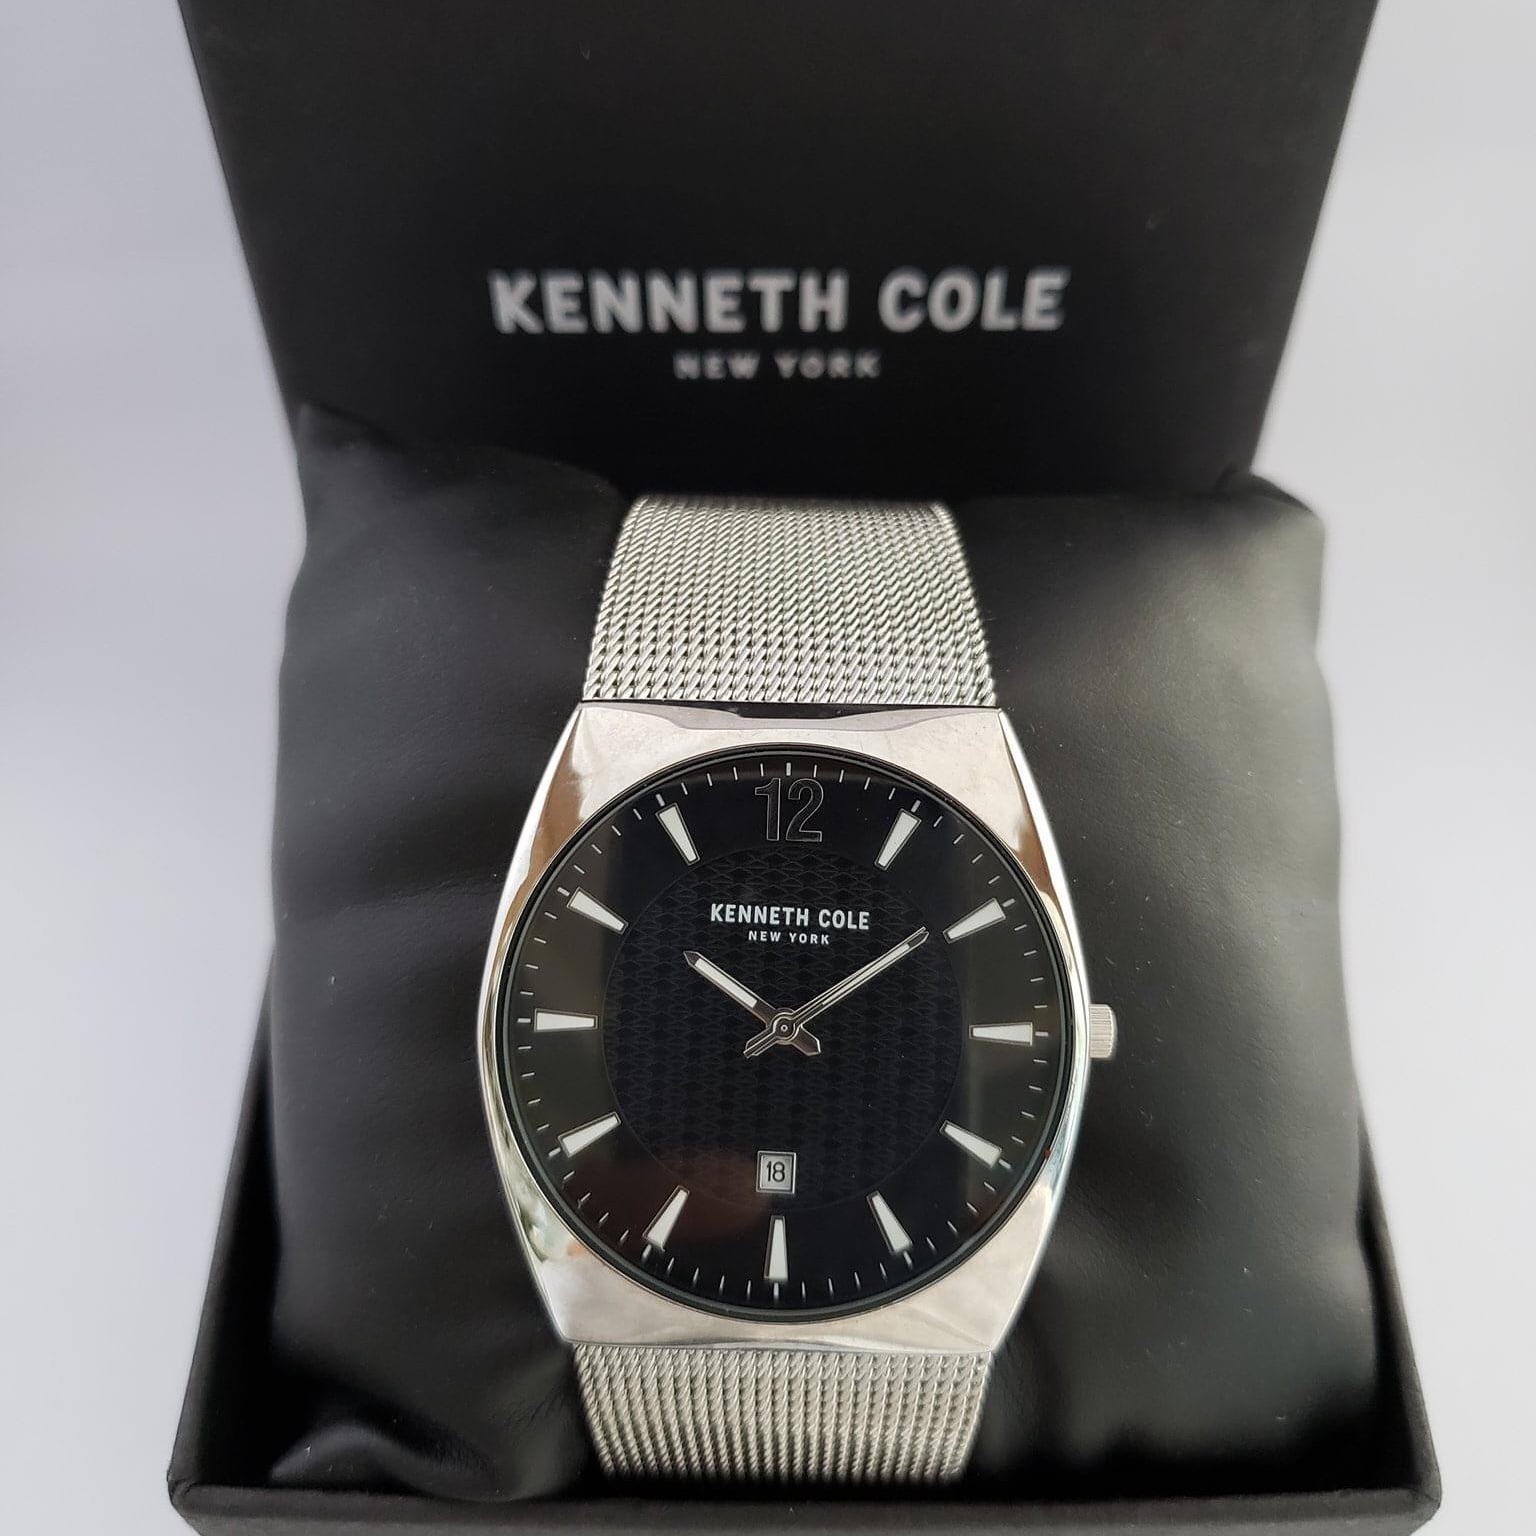 Buy Kenneth Cole New York Top Products at Best Prices online 